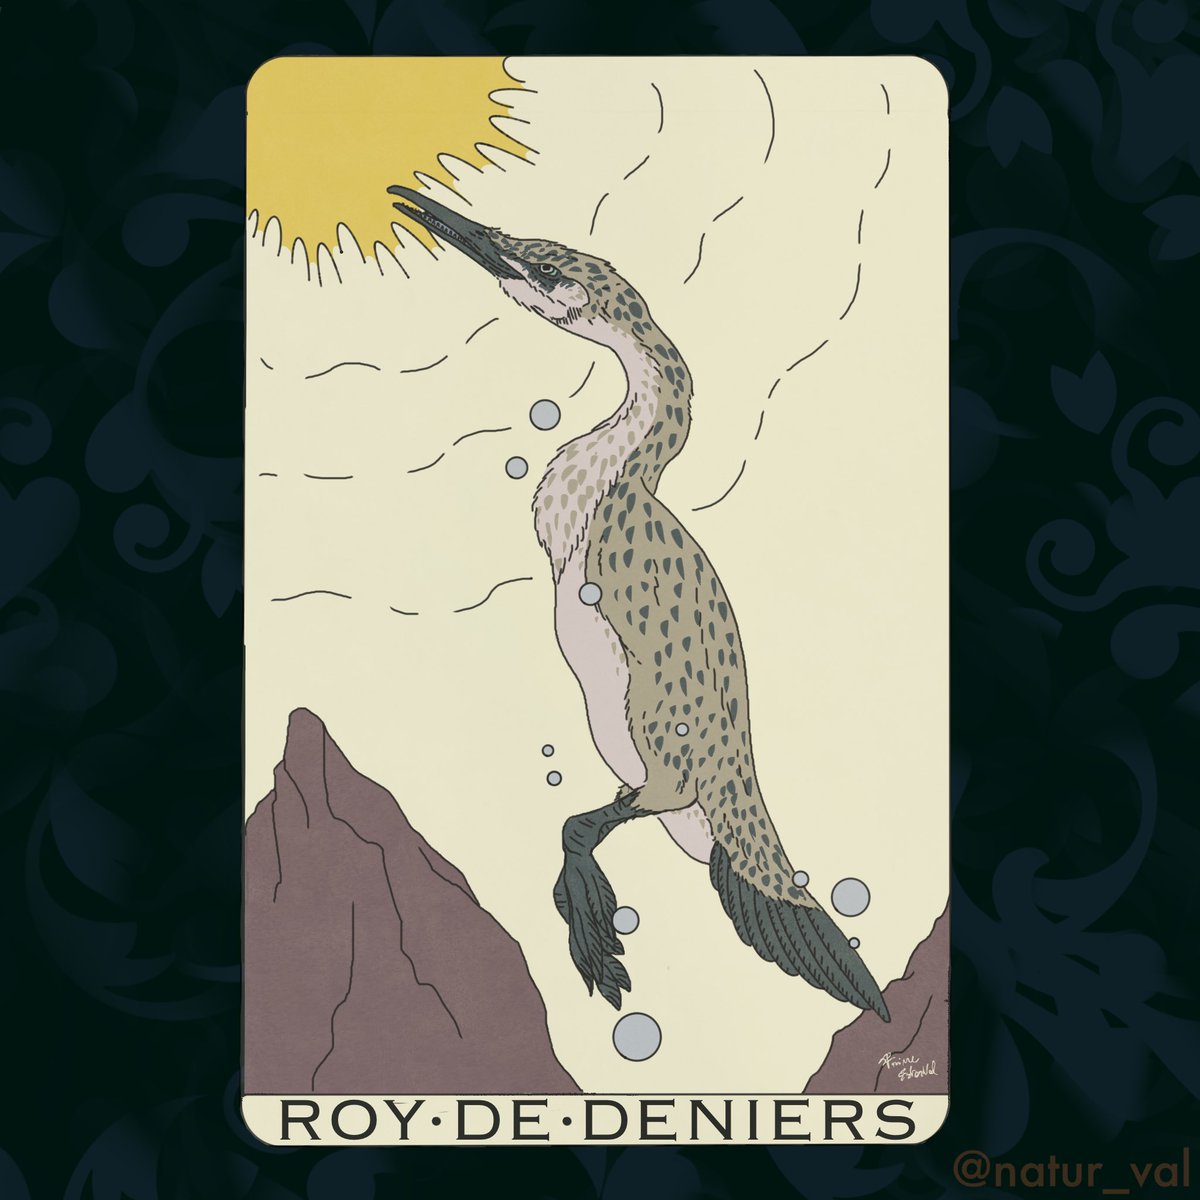 Tarot Before Time - Roy de Deniers (King of Pentacles). Hesperornis regalis, a seabird that lived during the Upper Cretaceous, with strong legs for swimming, almost non-existent wings and a beak with sharp teeth for harpooning fish. It almost seems to grasp the Sun with its beak.